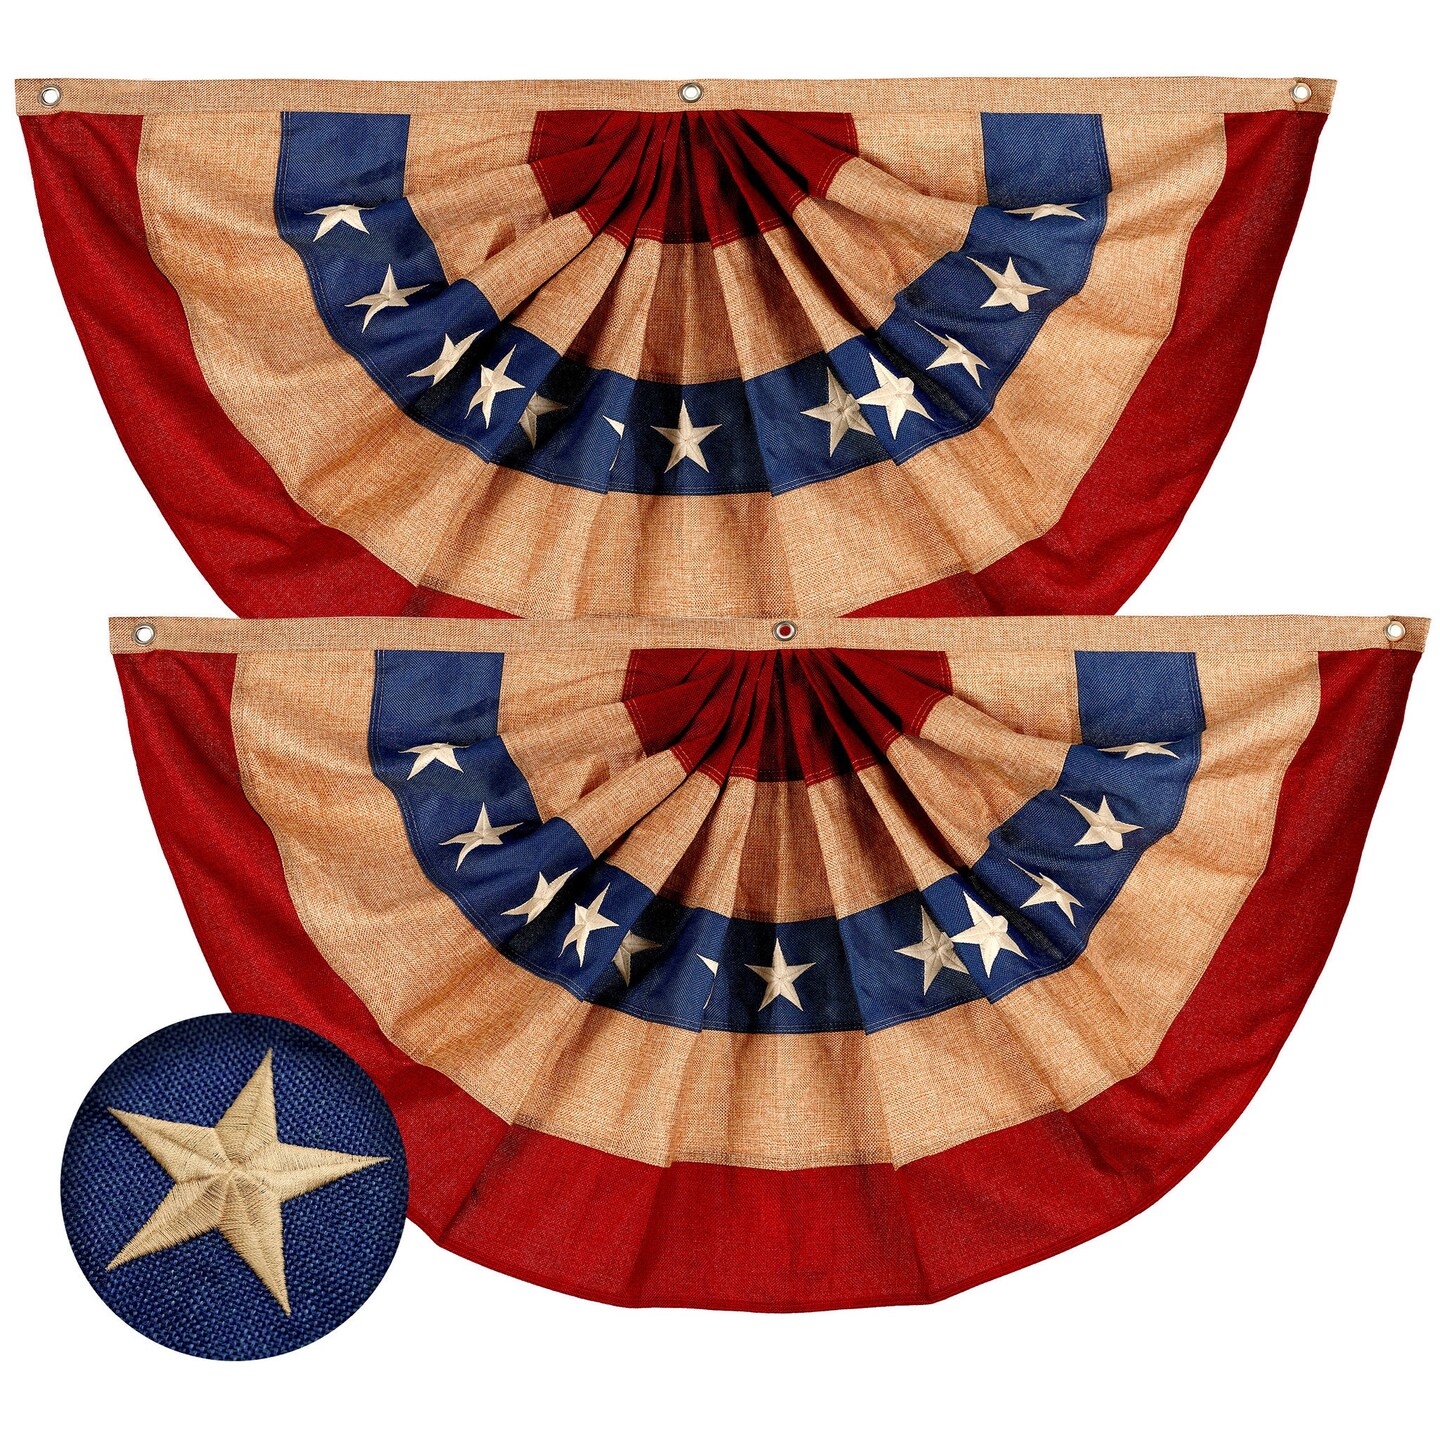 G128 - 2 Pack: USA Tea Stained Pleated Fan Flag 2x4FT Burlap Embroidered Polyester Stars and Stripes